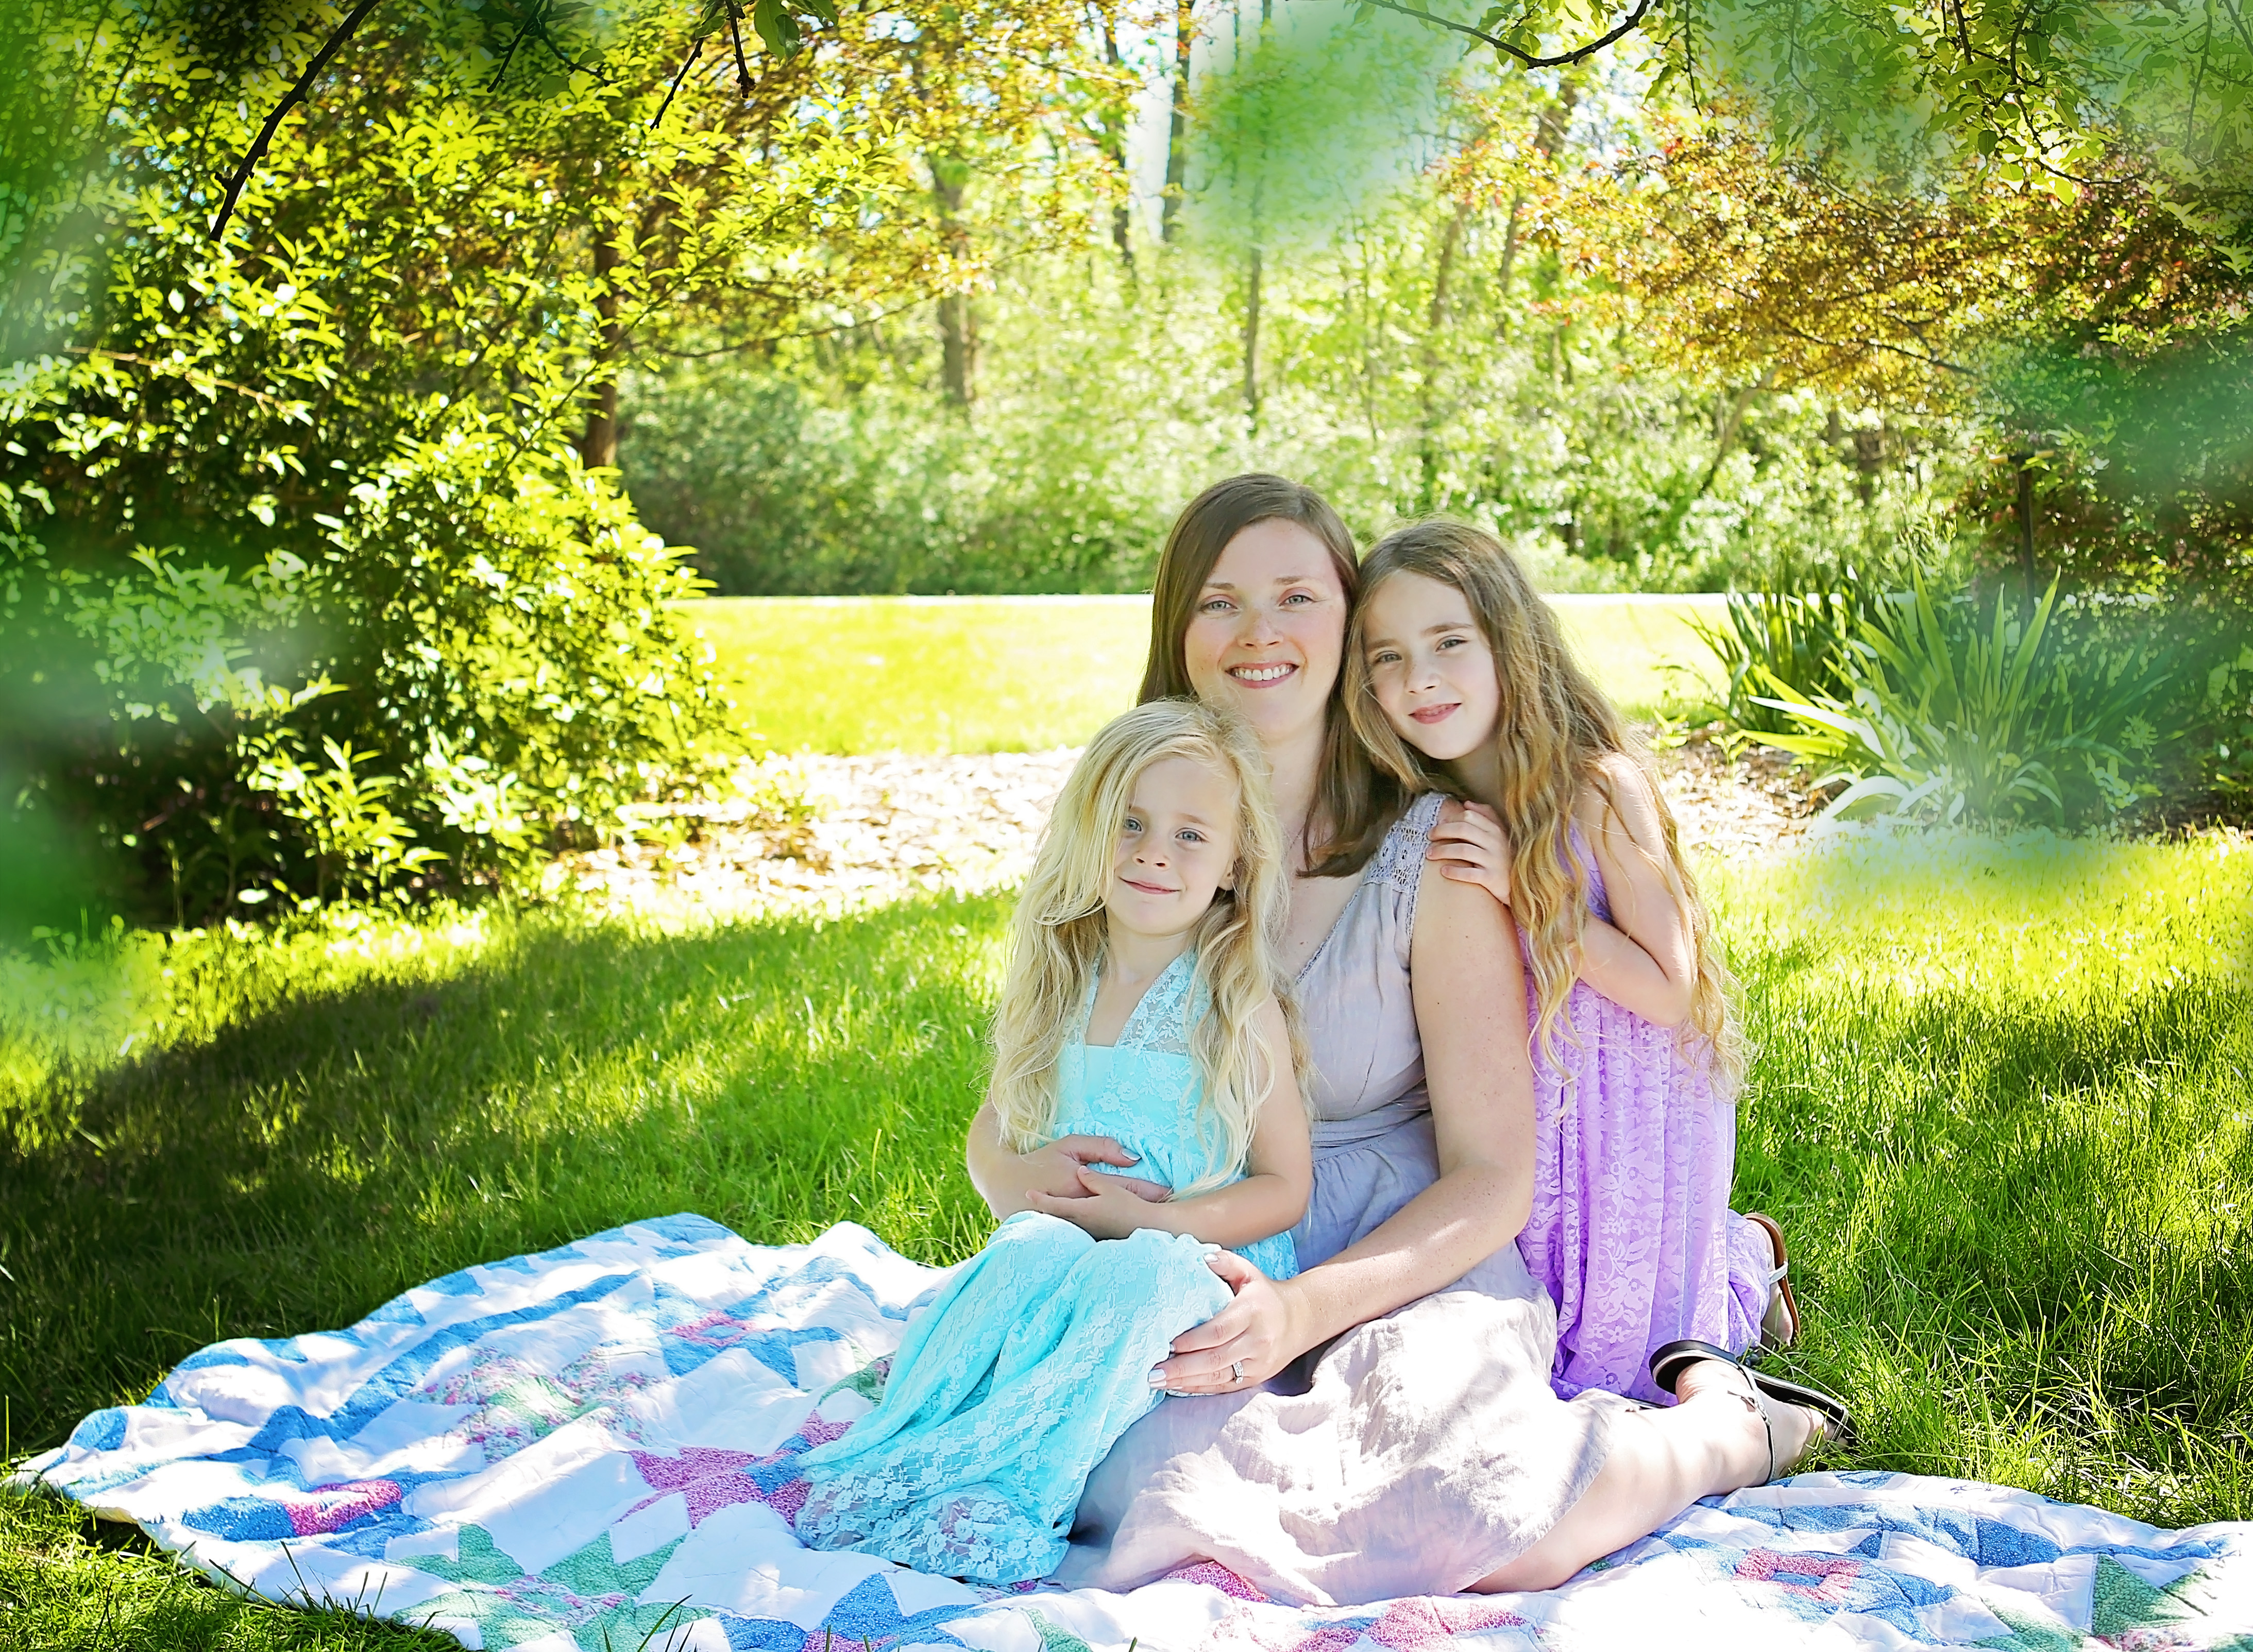 "mothers day photo session" "Mother daughter photo session" Utica Illinois photographer